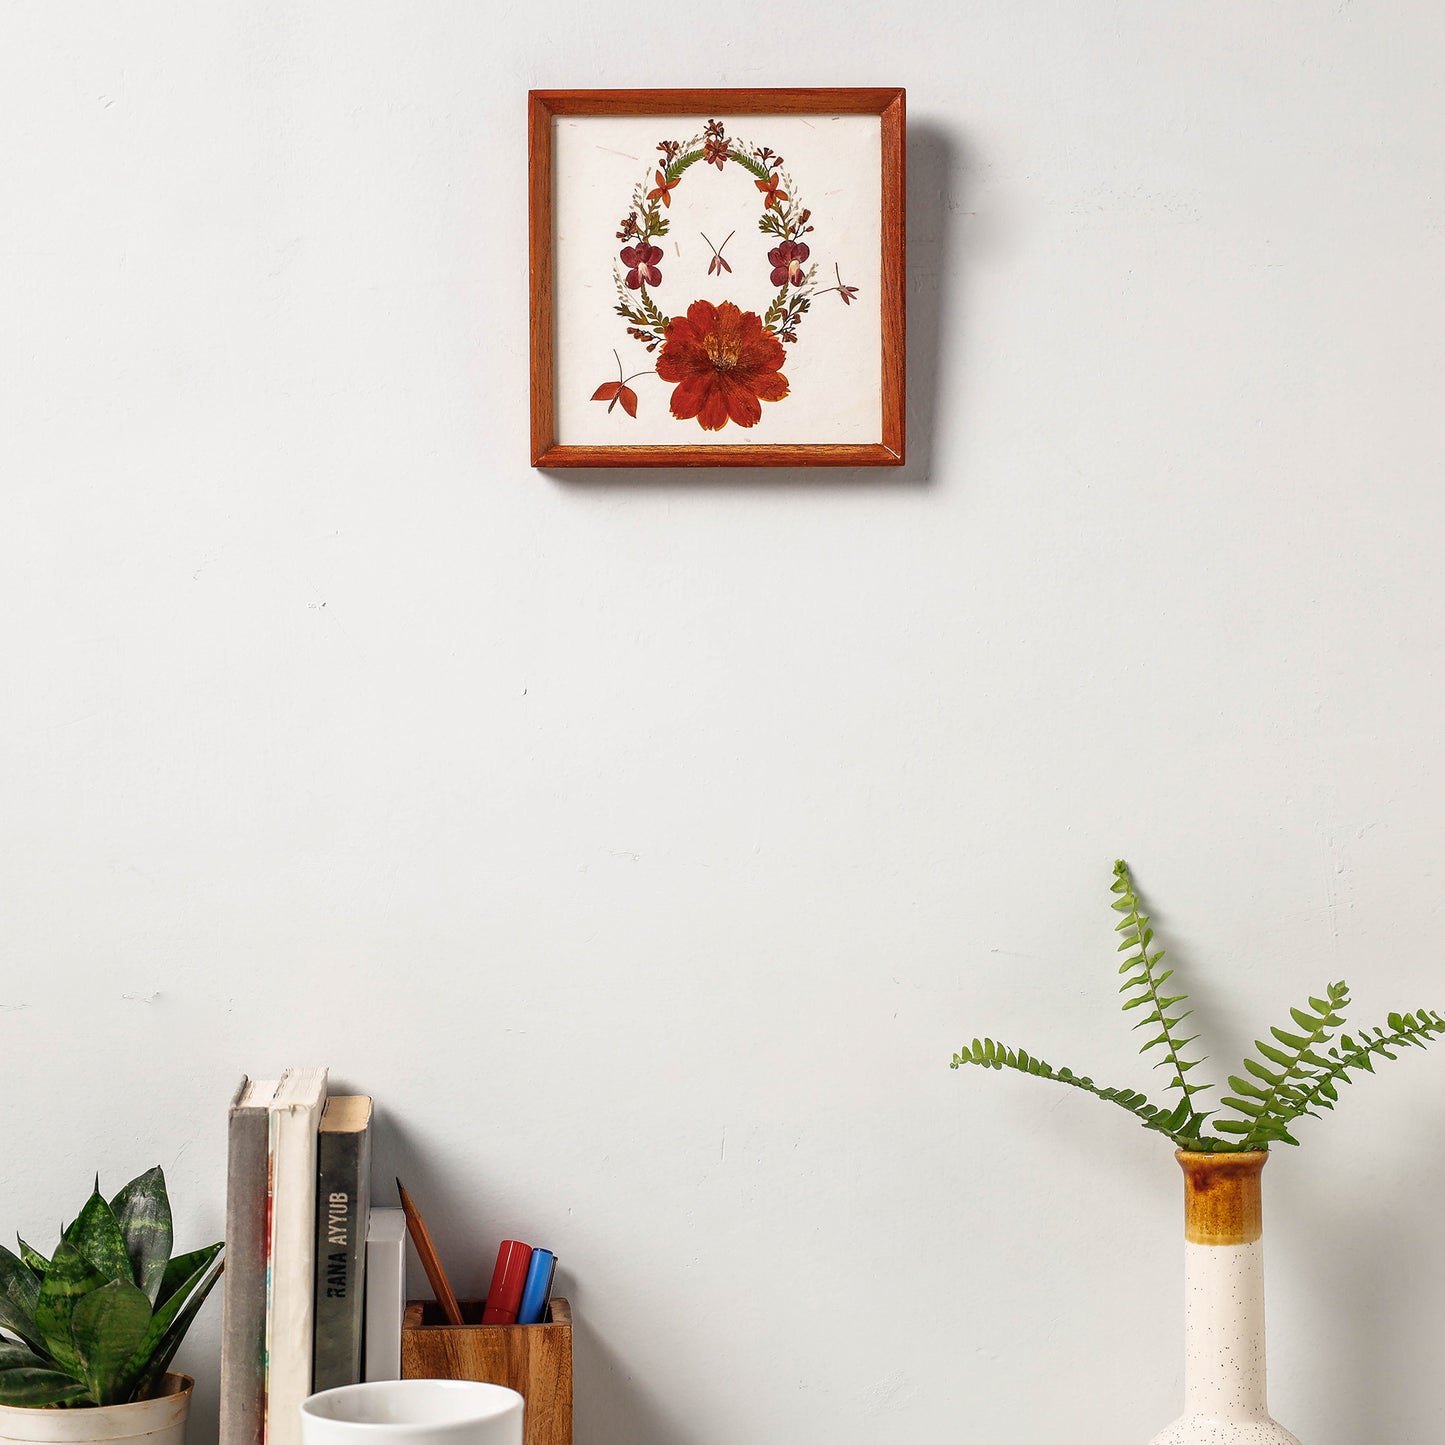 Wall Hanging Wooden Frame